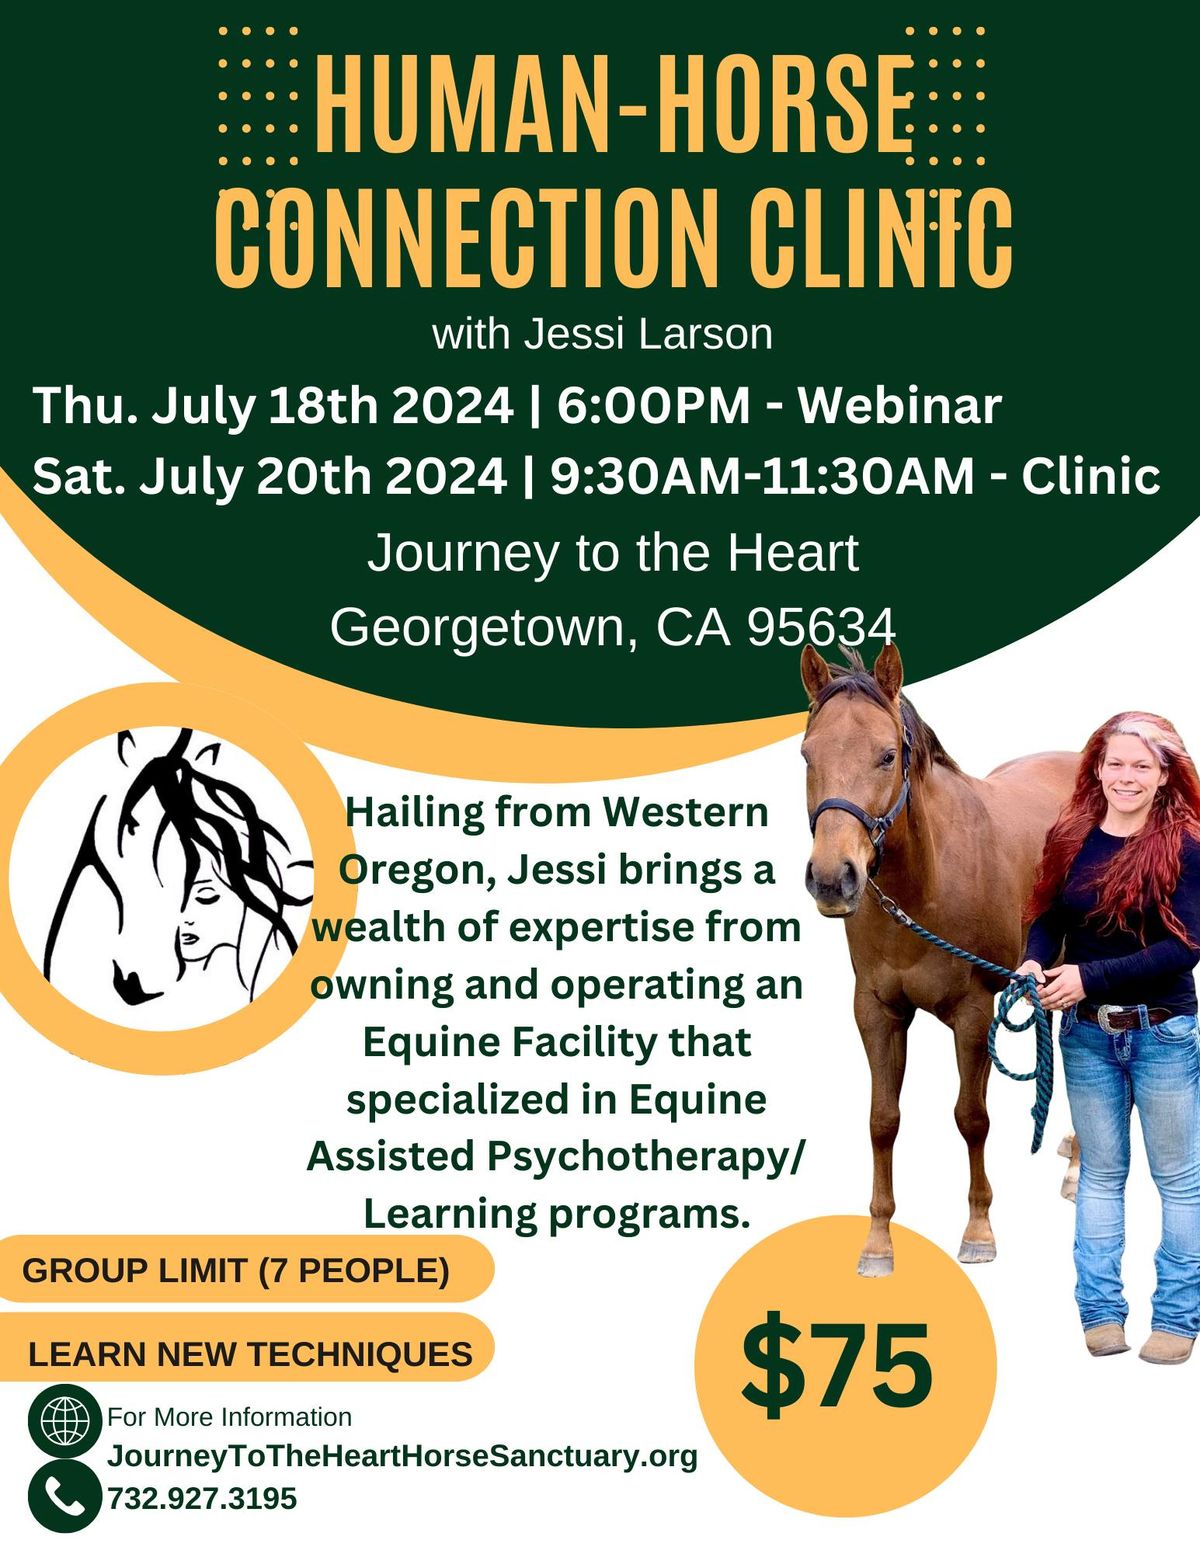 The Horse-Human Connection with Jessi Larson